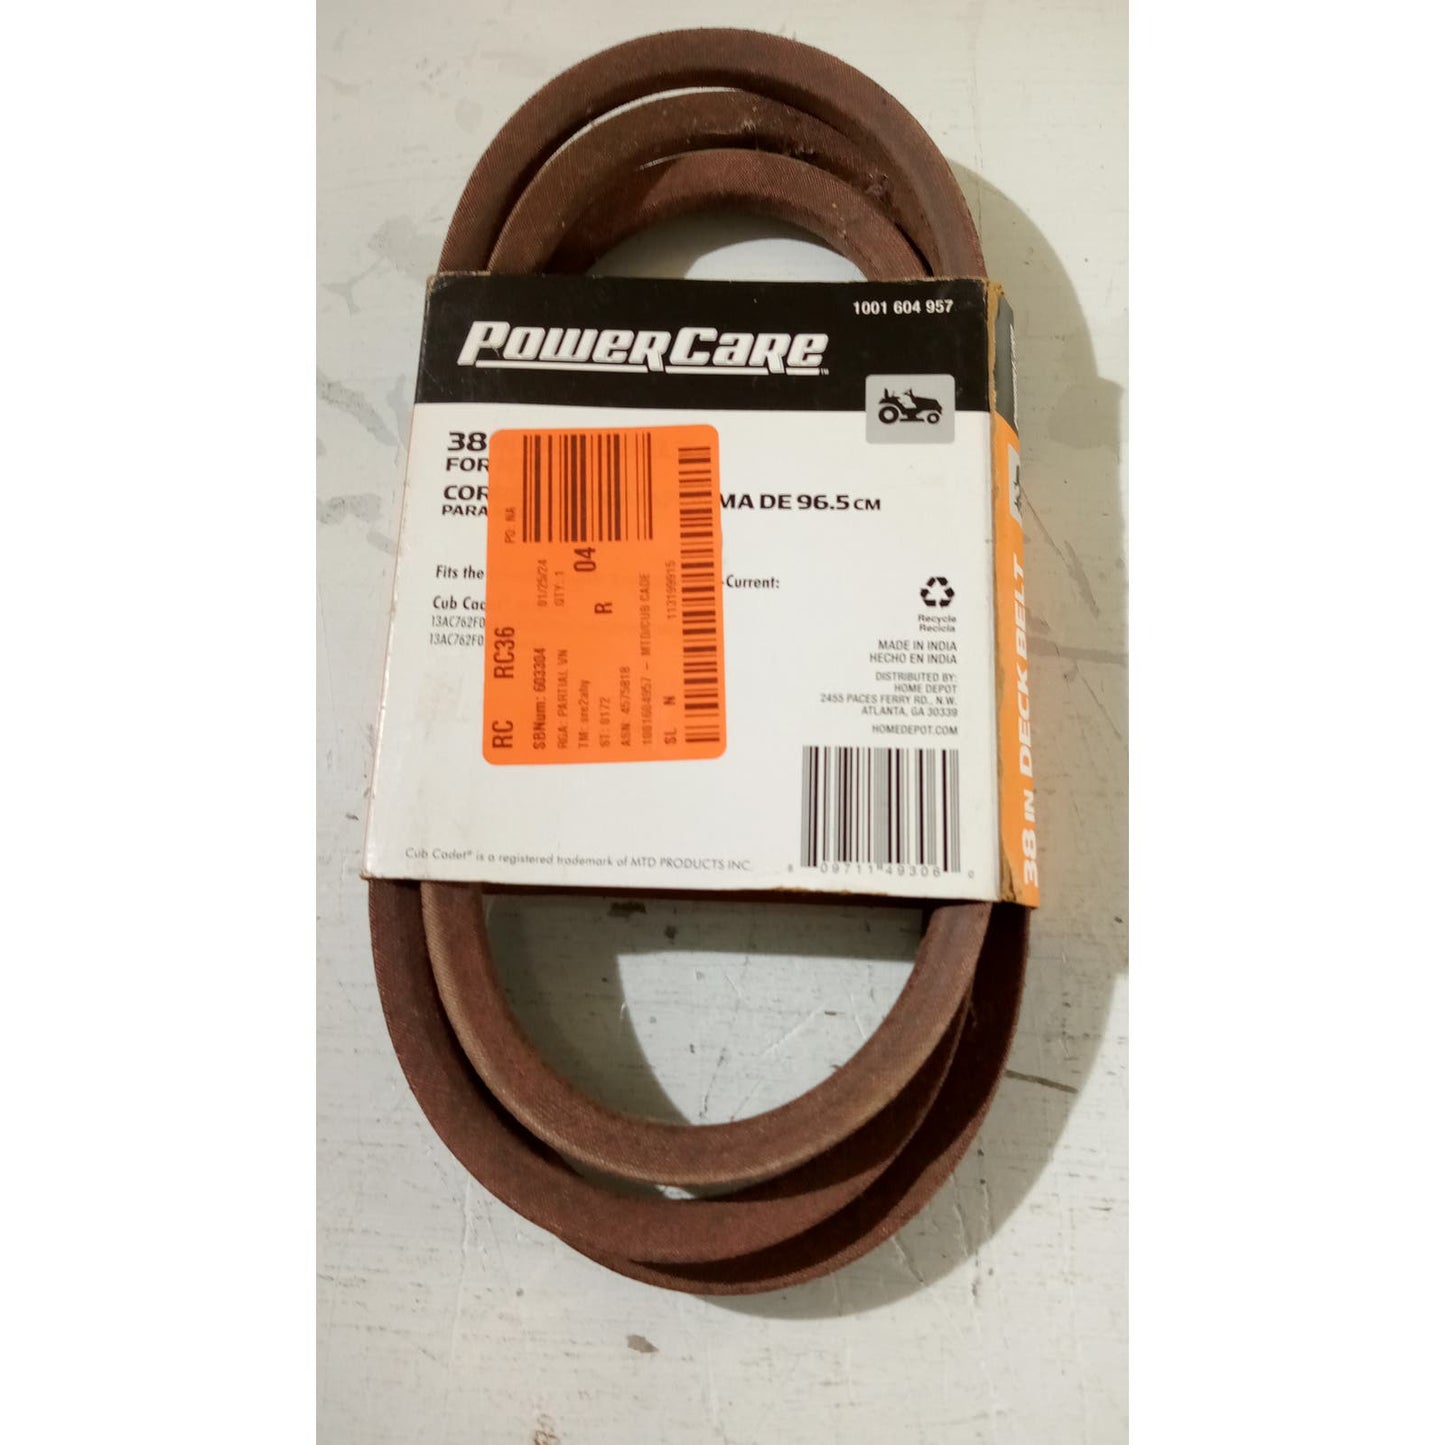 Powercare 38 in. Tractor Deck Belt Fit Multiple MTD/Cub Cadets, See Last Image